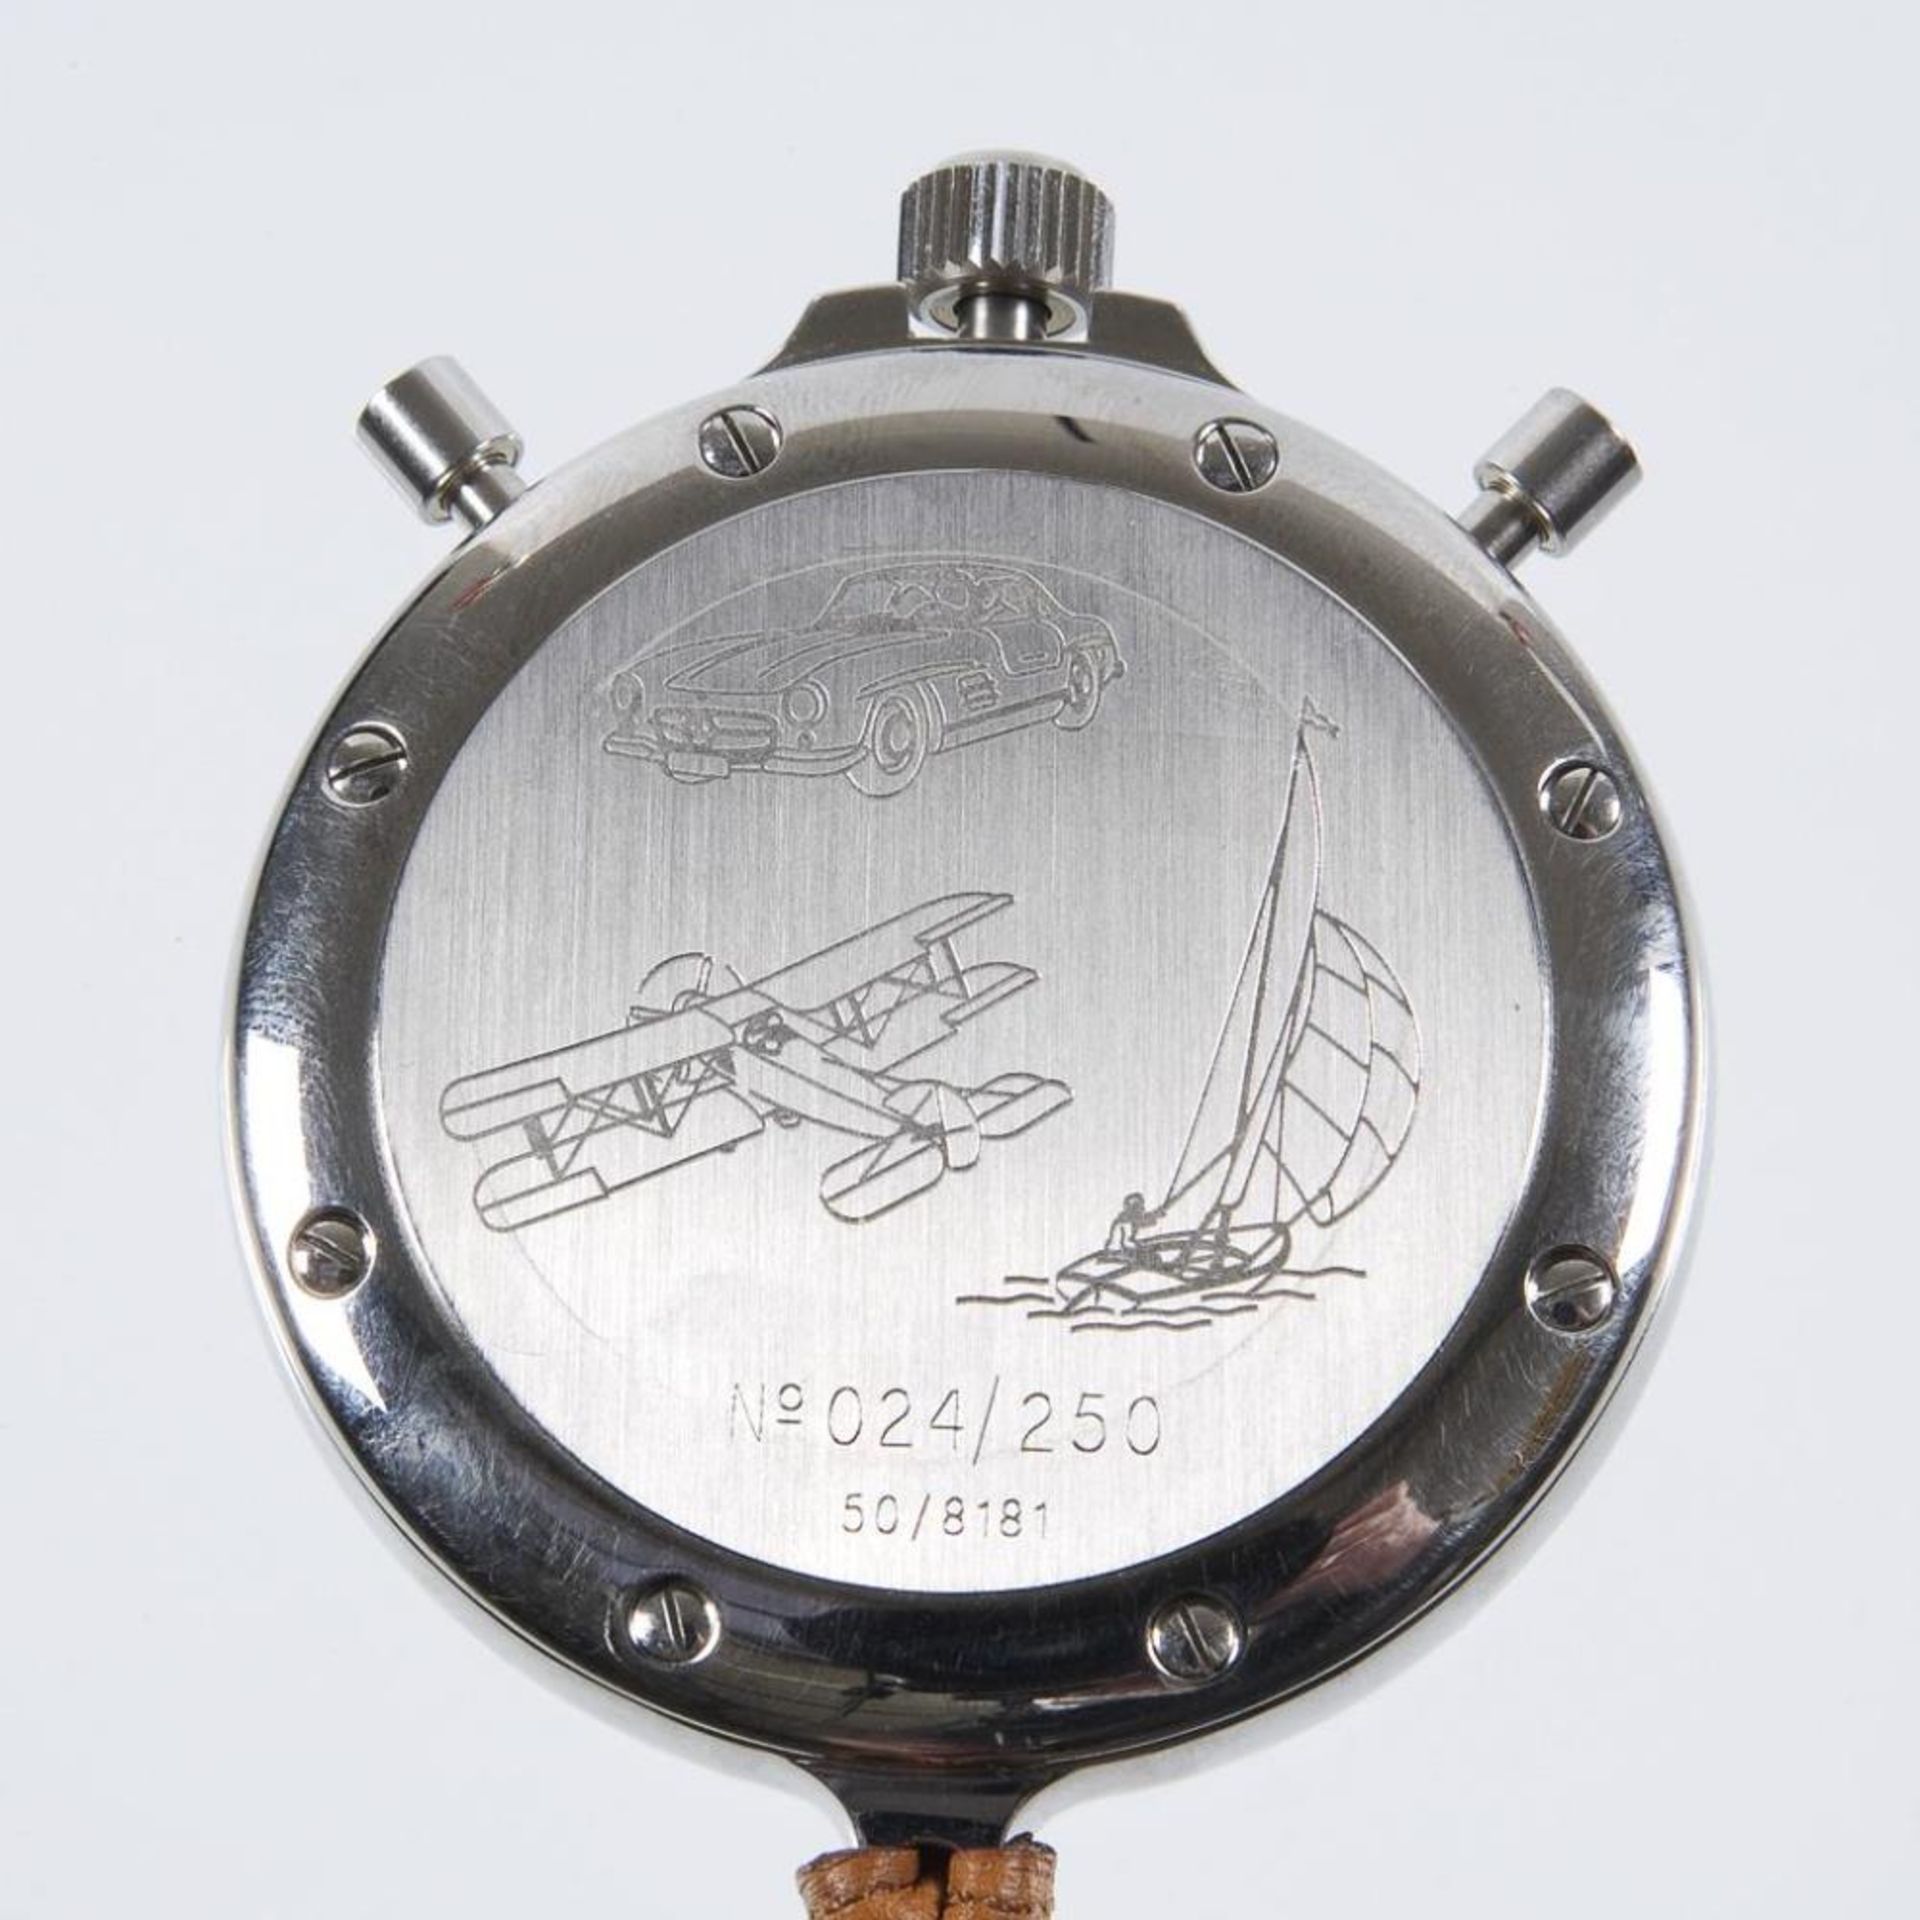 Stoppuhr-Chronograph Rattrapante.. Chopard. - Image 3 of 6